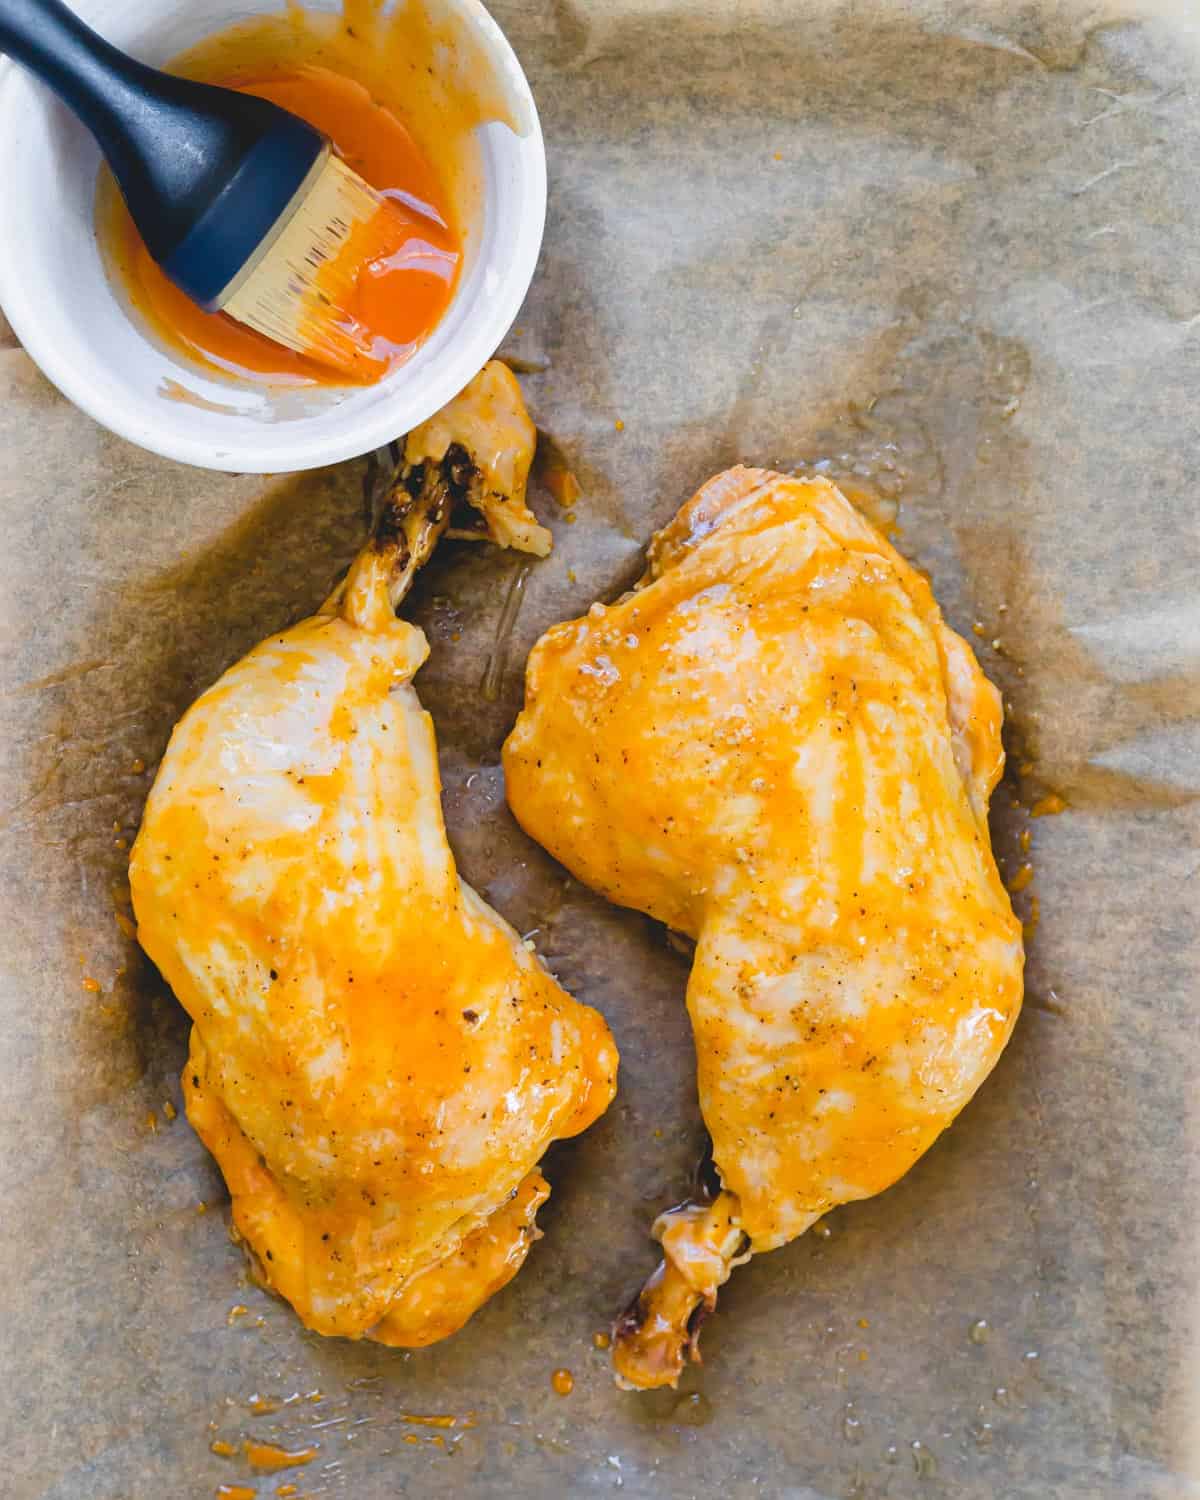 Brushing pressure cooked chicken leg quarters with buffalo sauce on a parchment lined baking sheet.